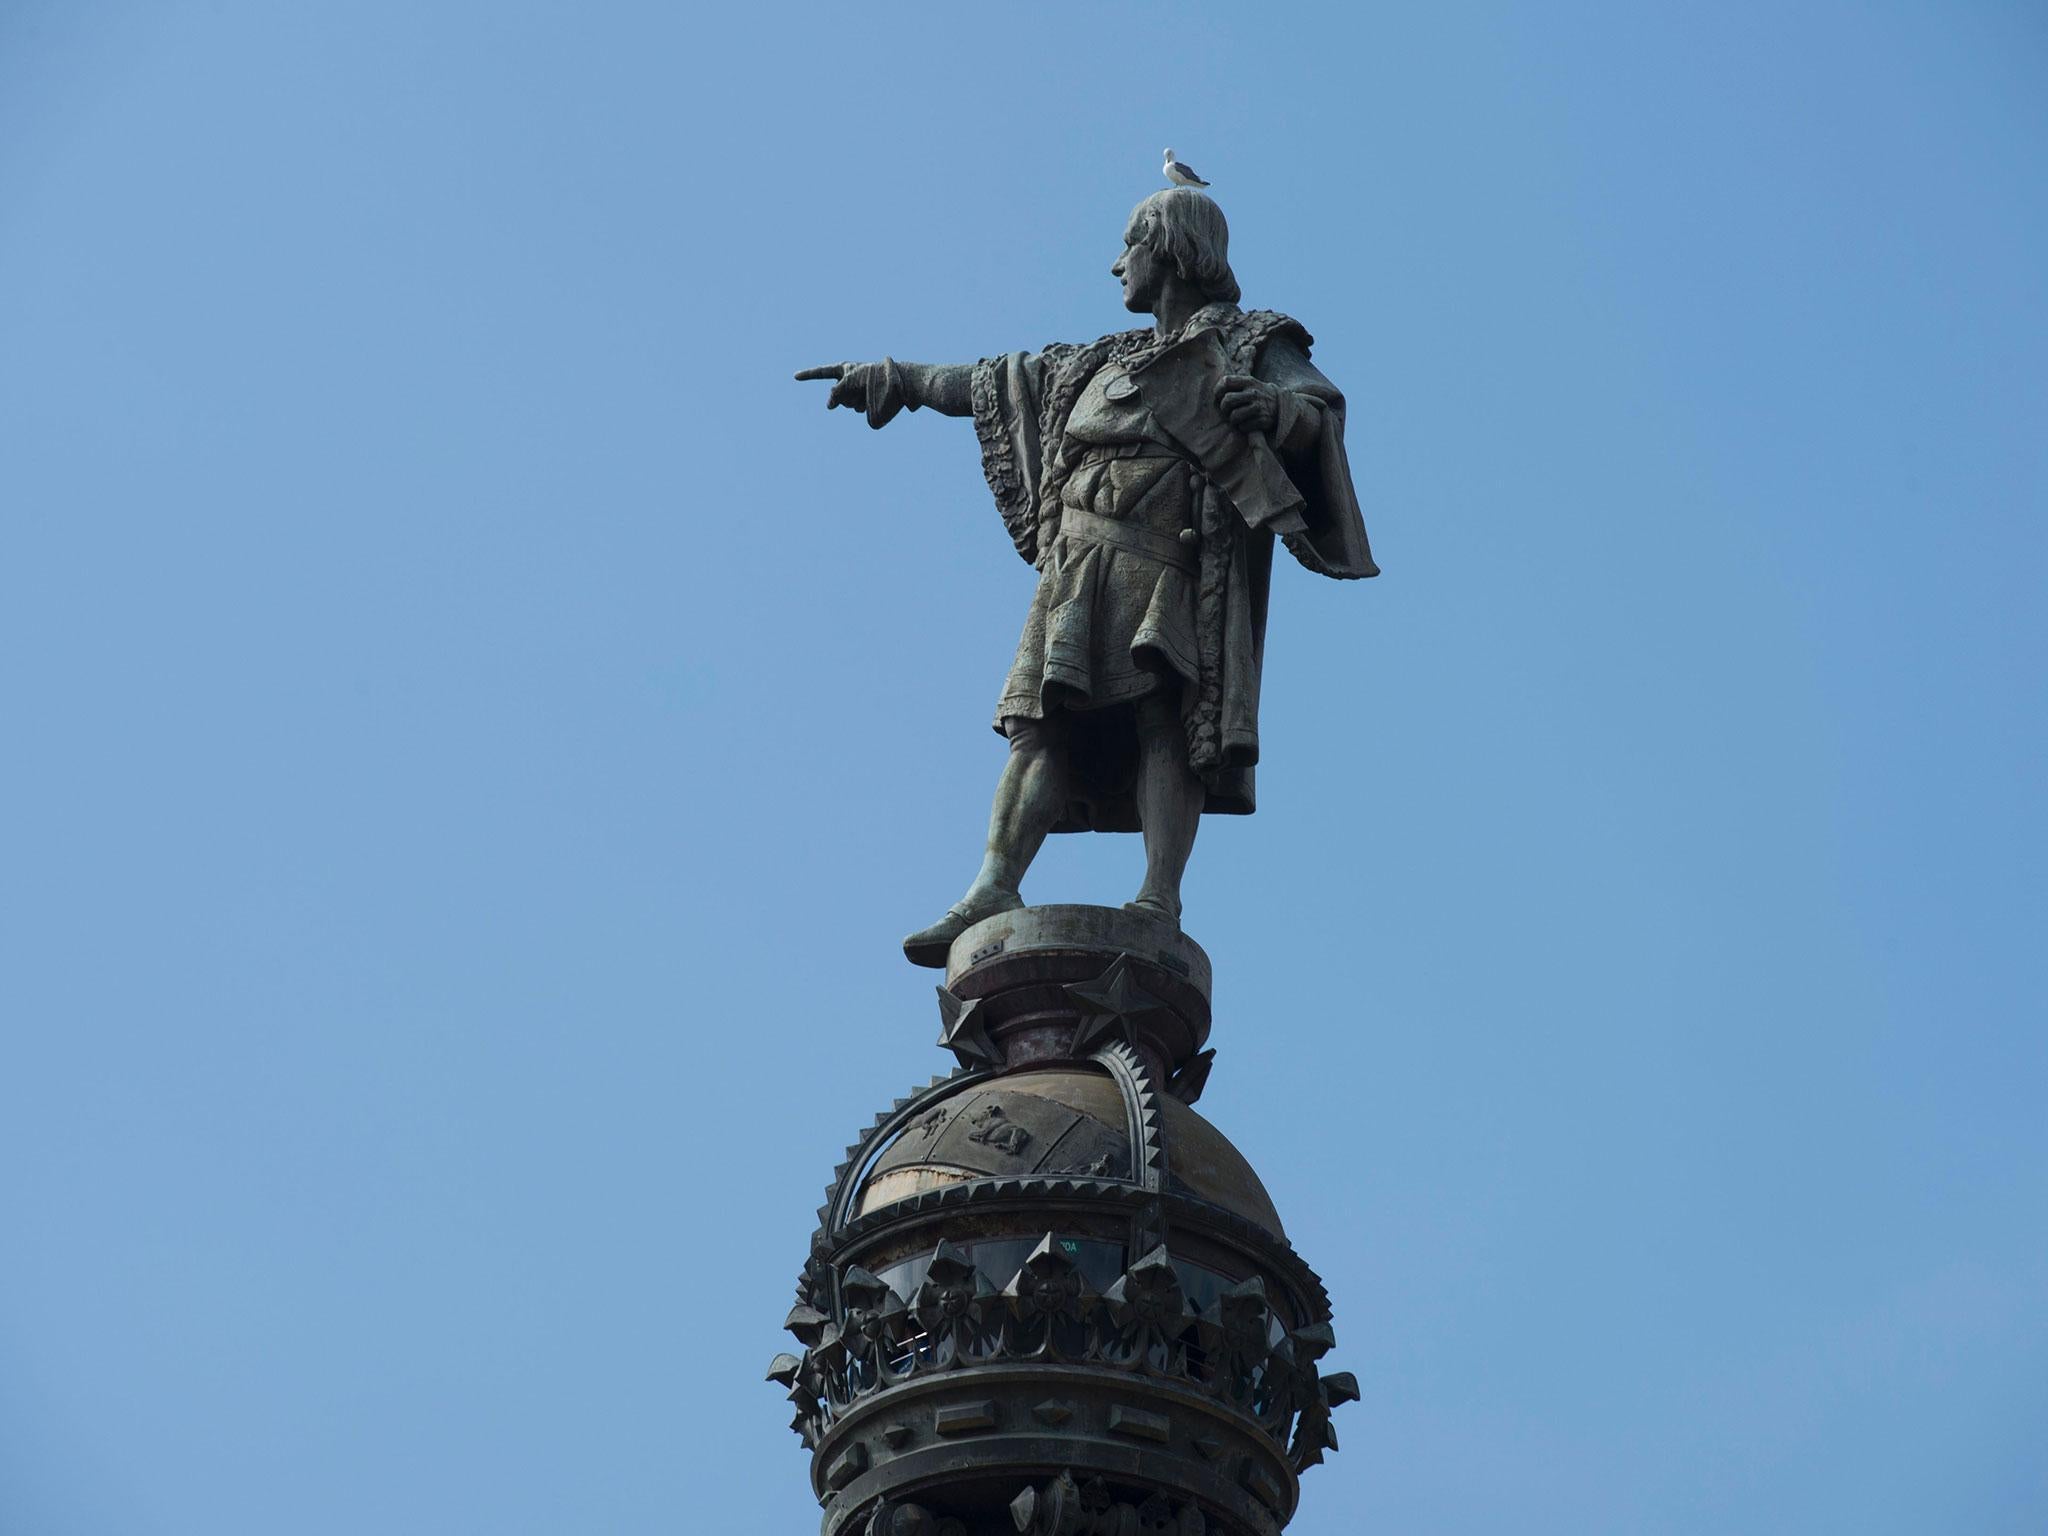 Pro-independence Catalan anticapitalist party CUP will propose today the withdrawal of Christopher Columbus' statue in Barcelona, one of the most representative monuments of the city, because they say it exalts slavery and imperialism